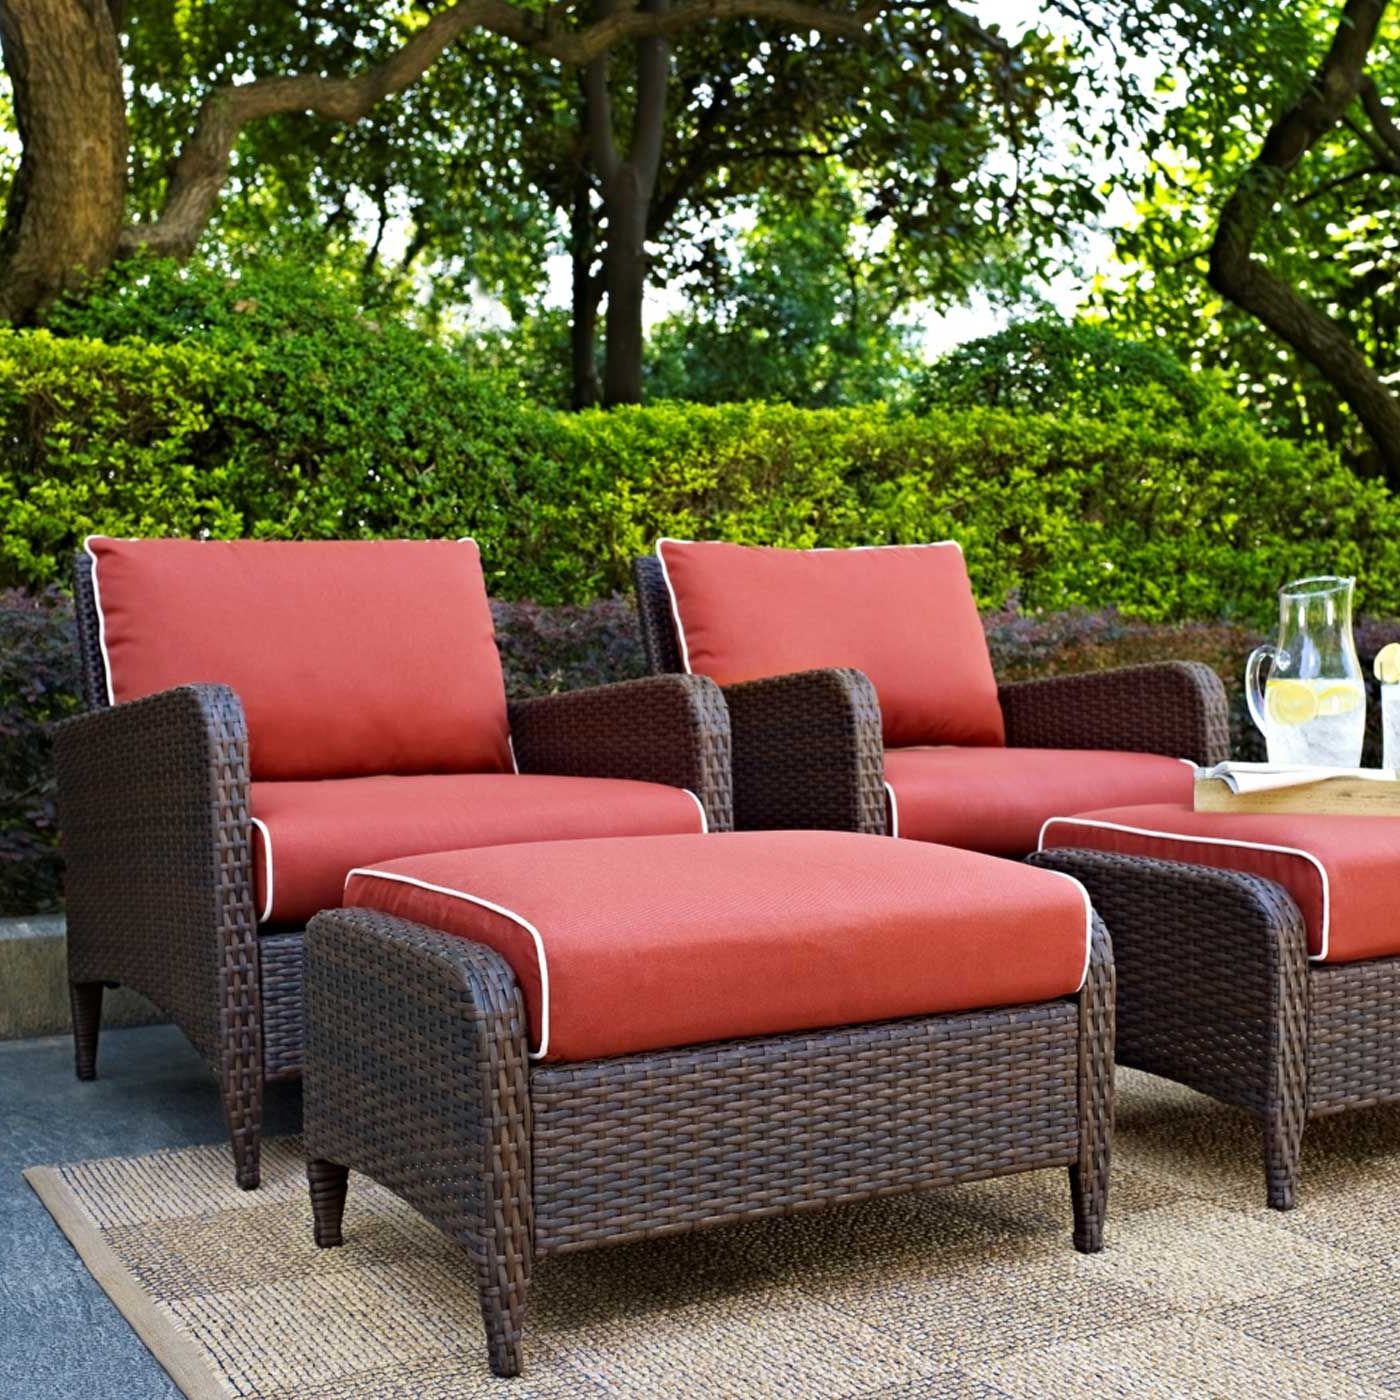 Most Current Crosley Kiawah 4 Piece Outdoor Wicker Seating Set With Sangria Cushions Regarding 4 Piece Outdoor Seating Patio Sets (View 3 of 15)